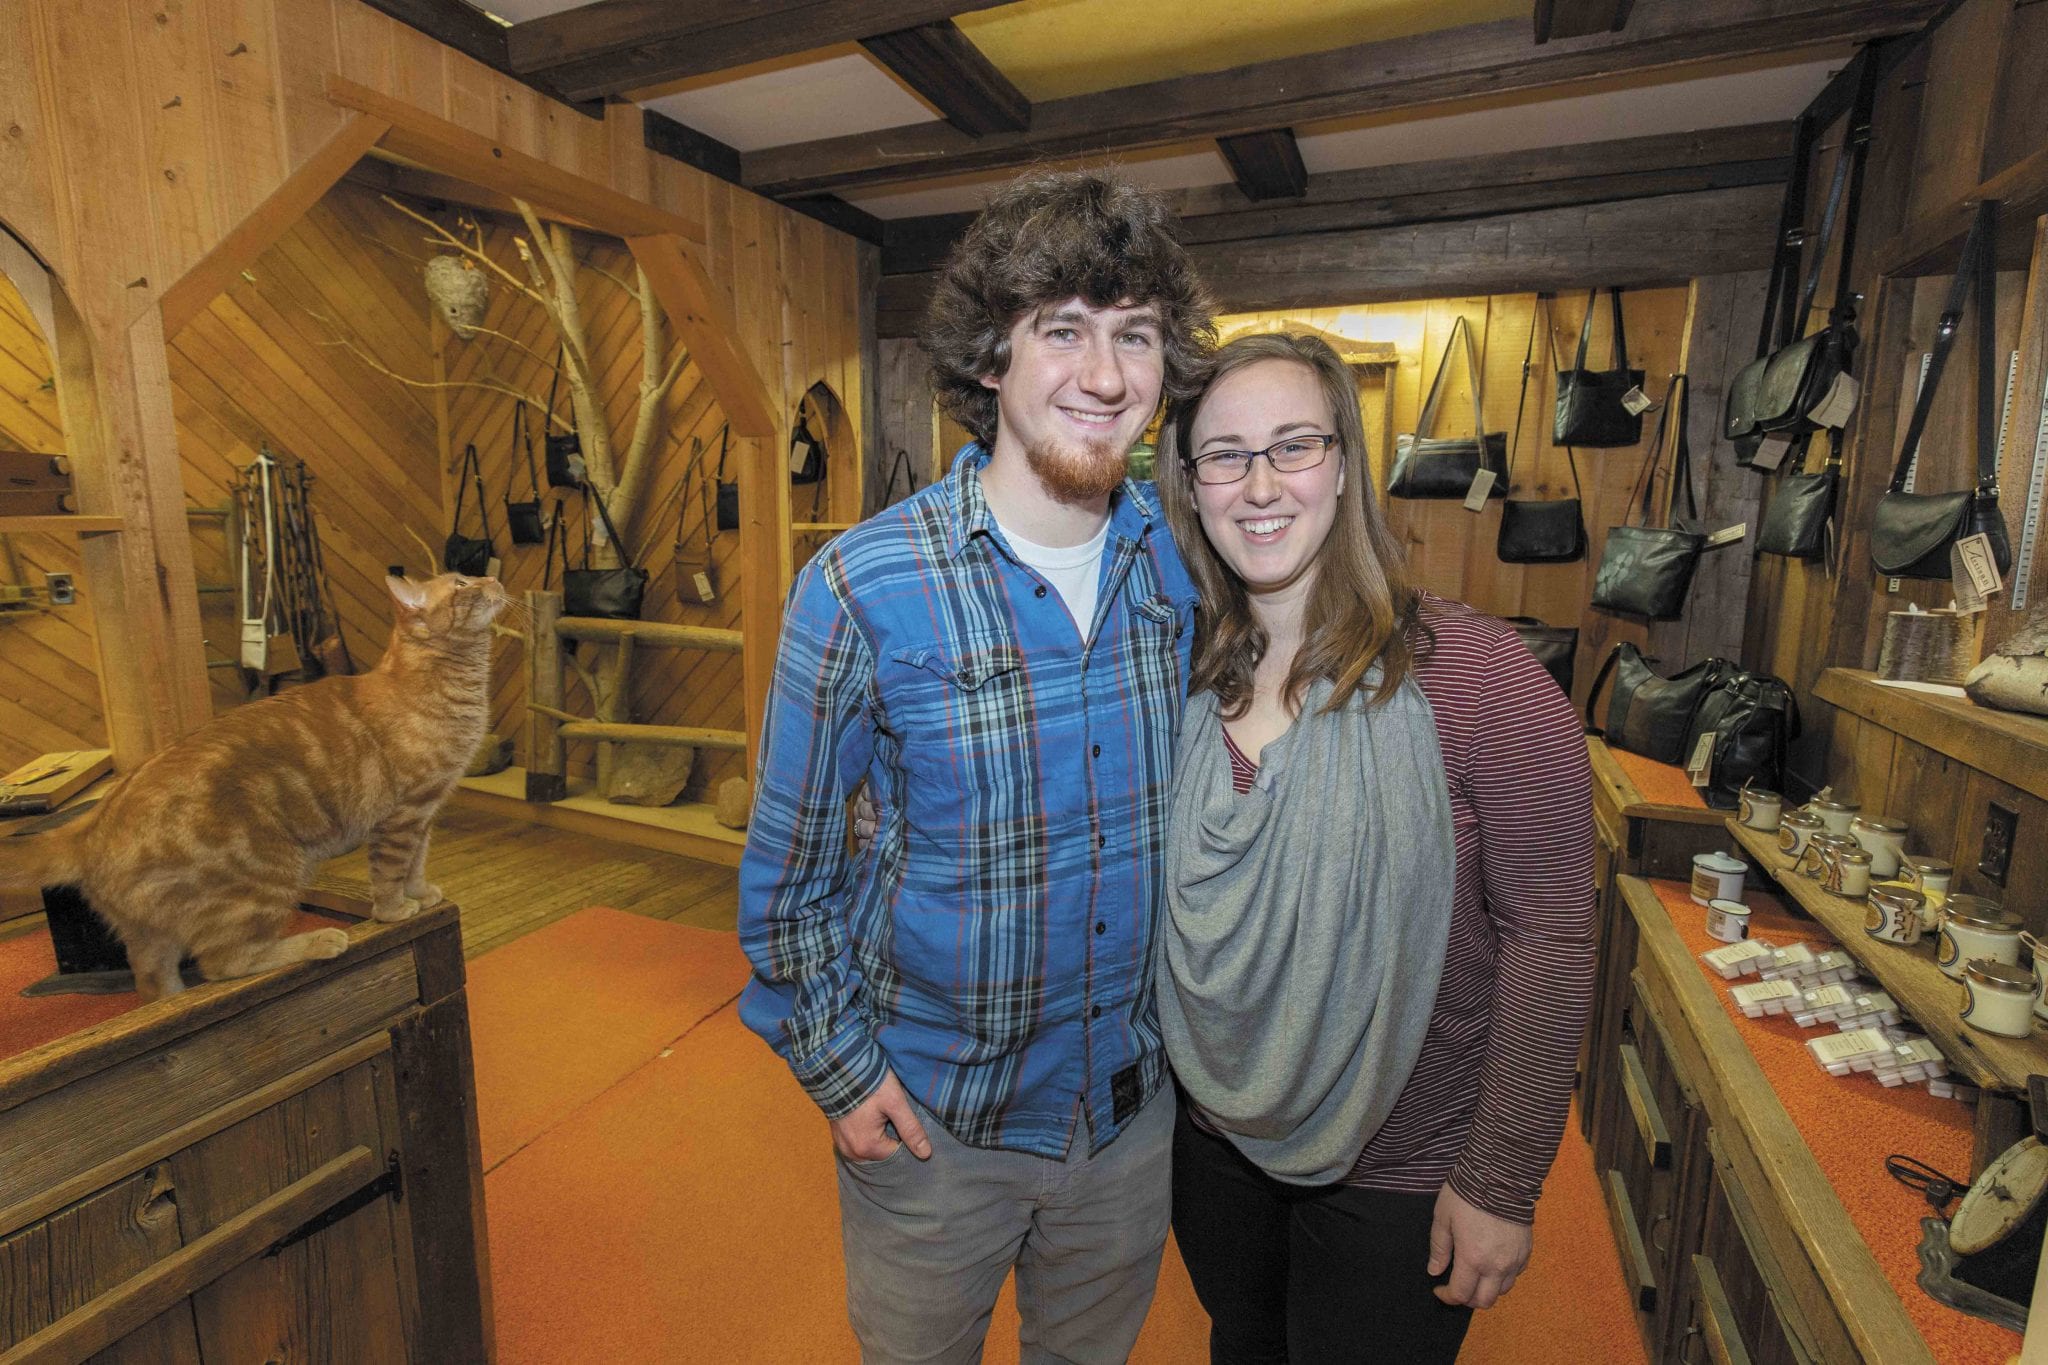 Leather Artisan owners Broyce and Allison Guerette